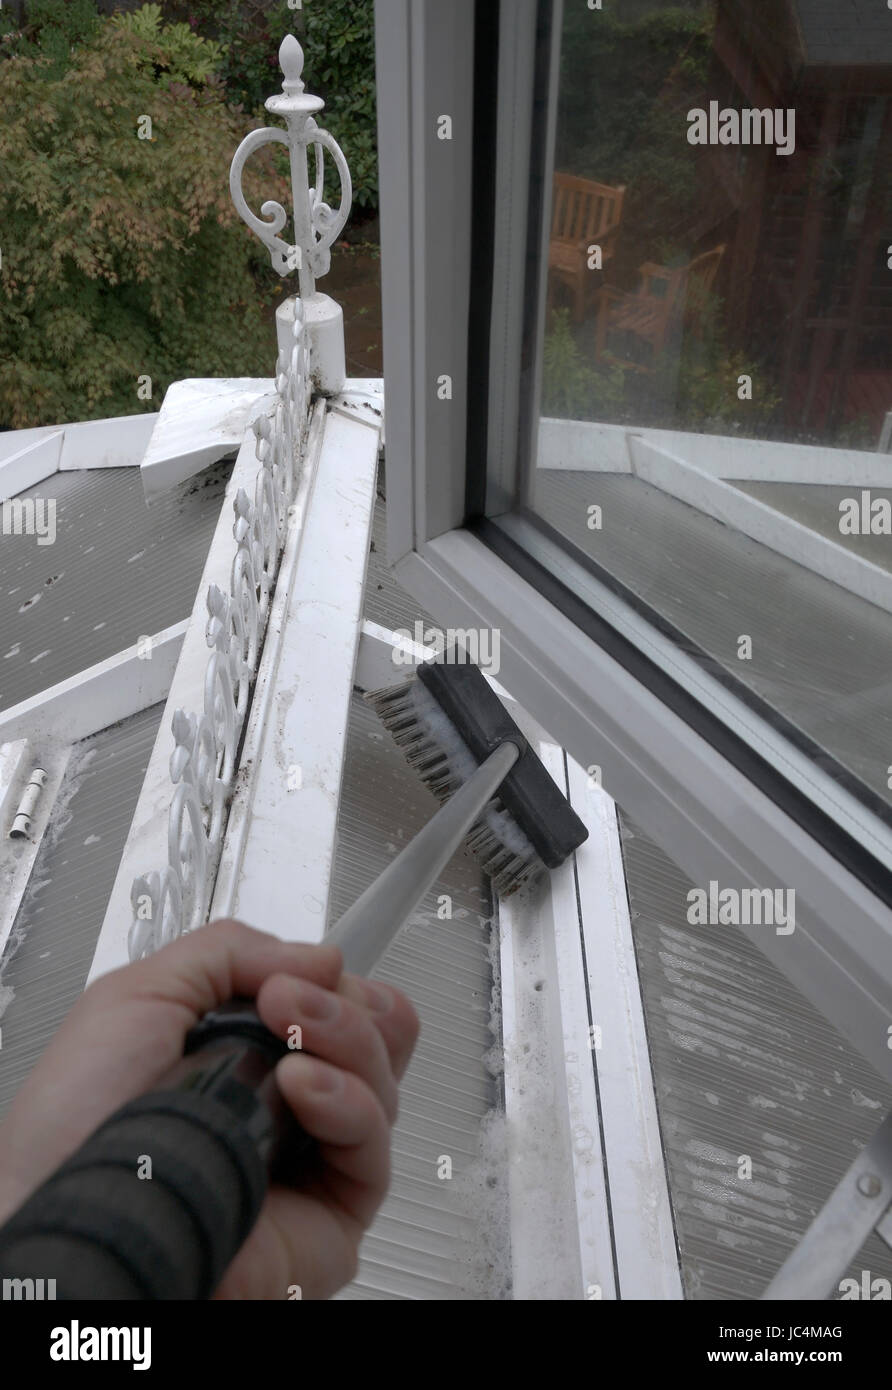 window cleaning Stock Photo